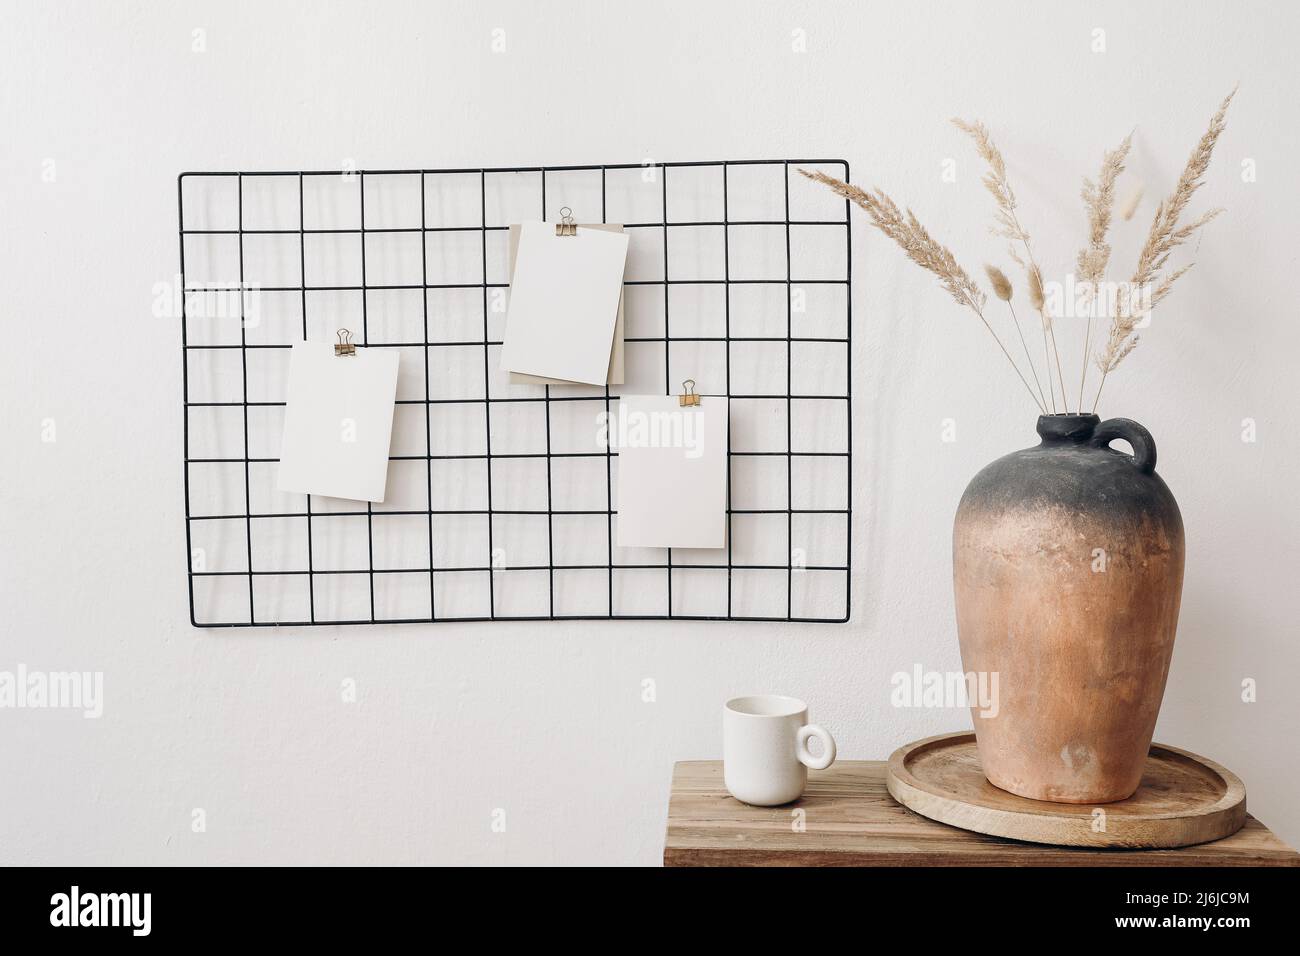 Black metal mesh noticeboard, bulletin board with blank memo cards mockups. Elegant home office interior concept. Vase with dry lagurus grass and cup Stock Photo